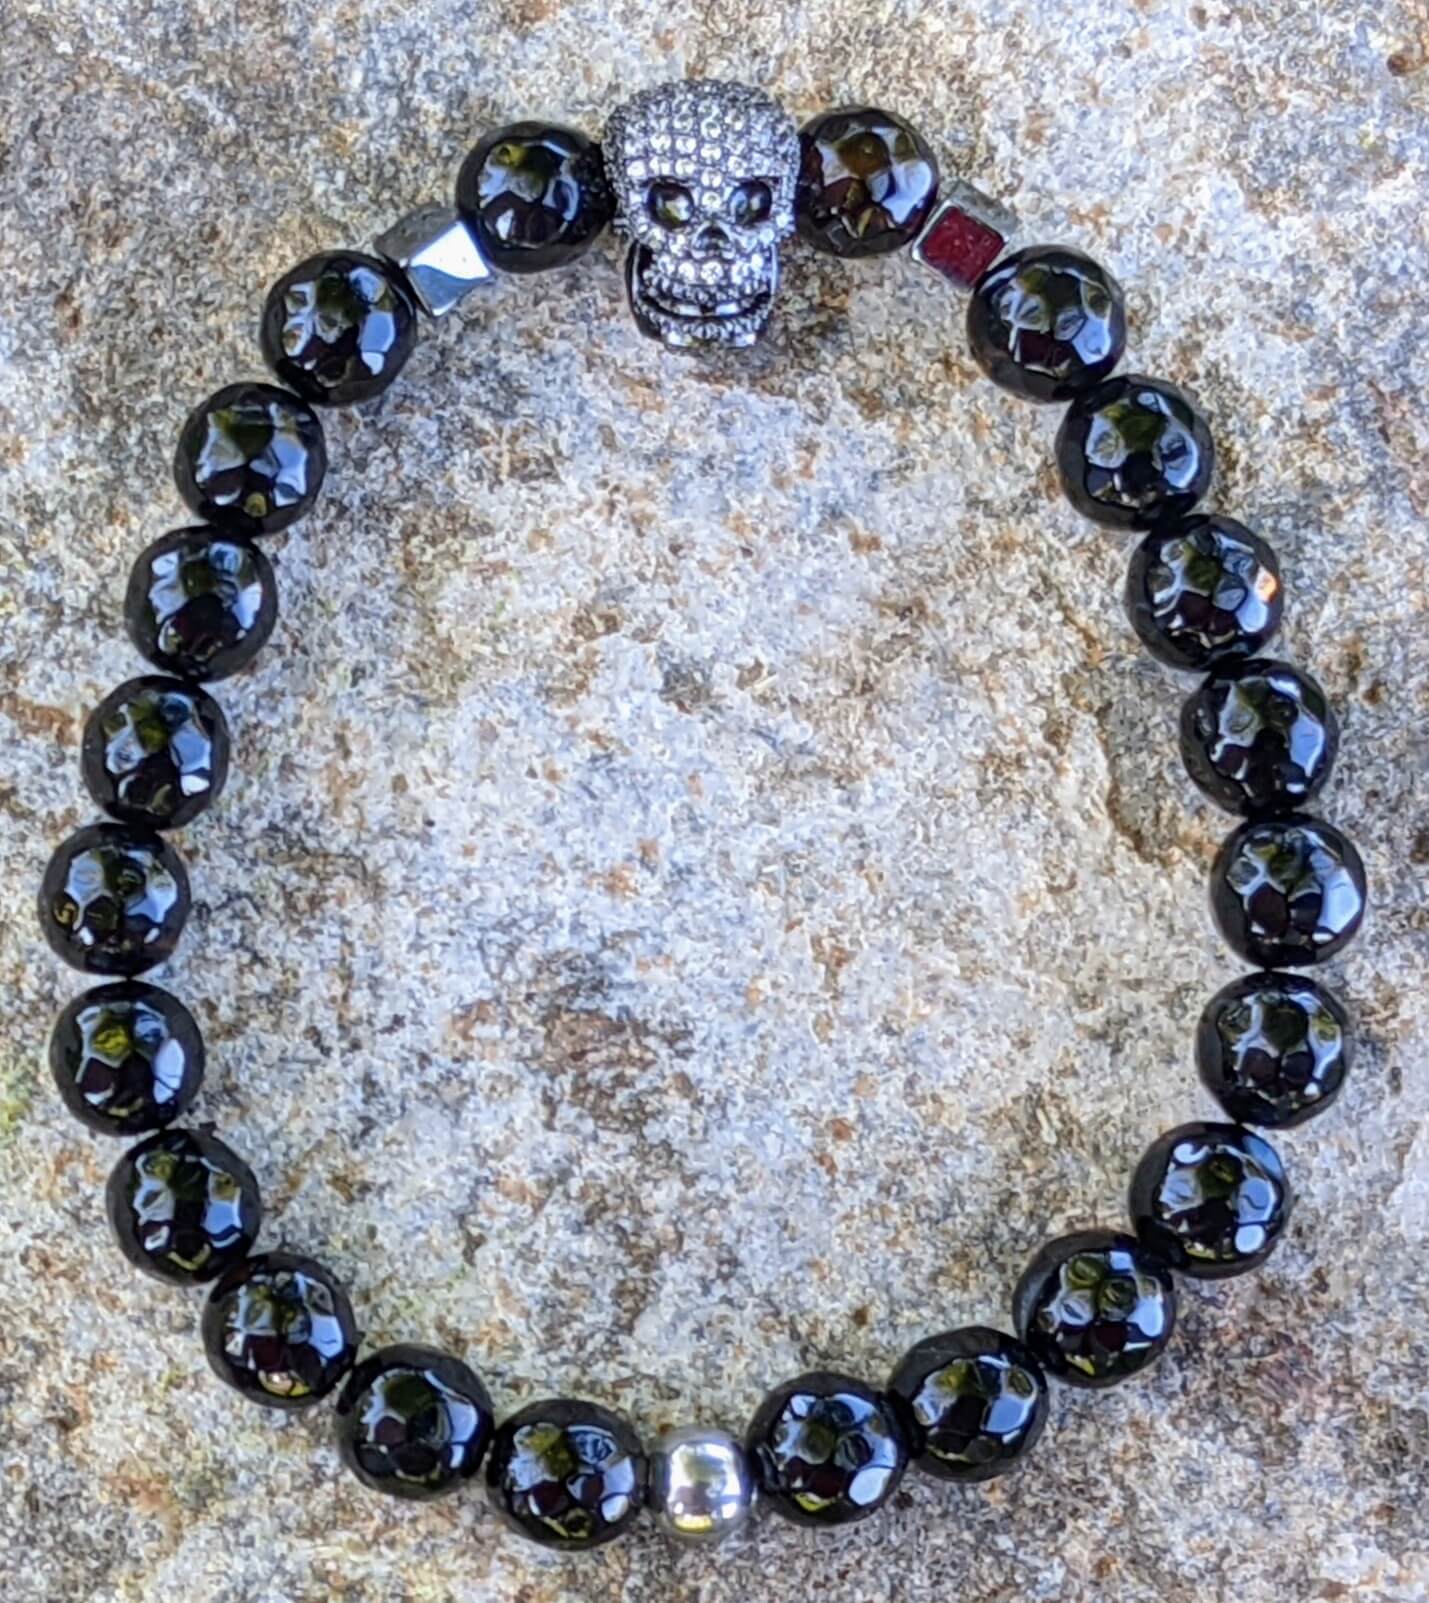 Black Skull with Black Agate and Hematite Spacers